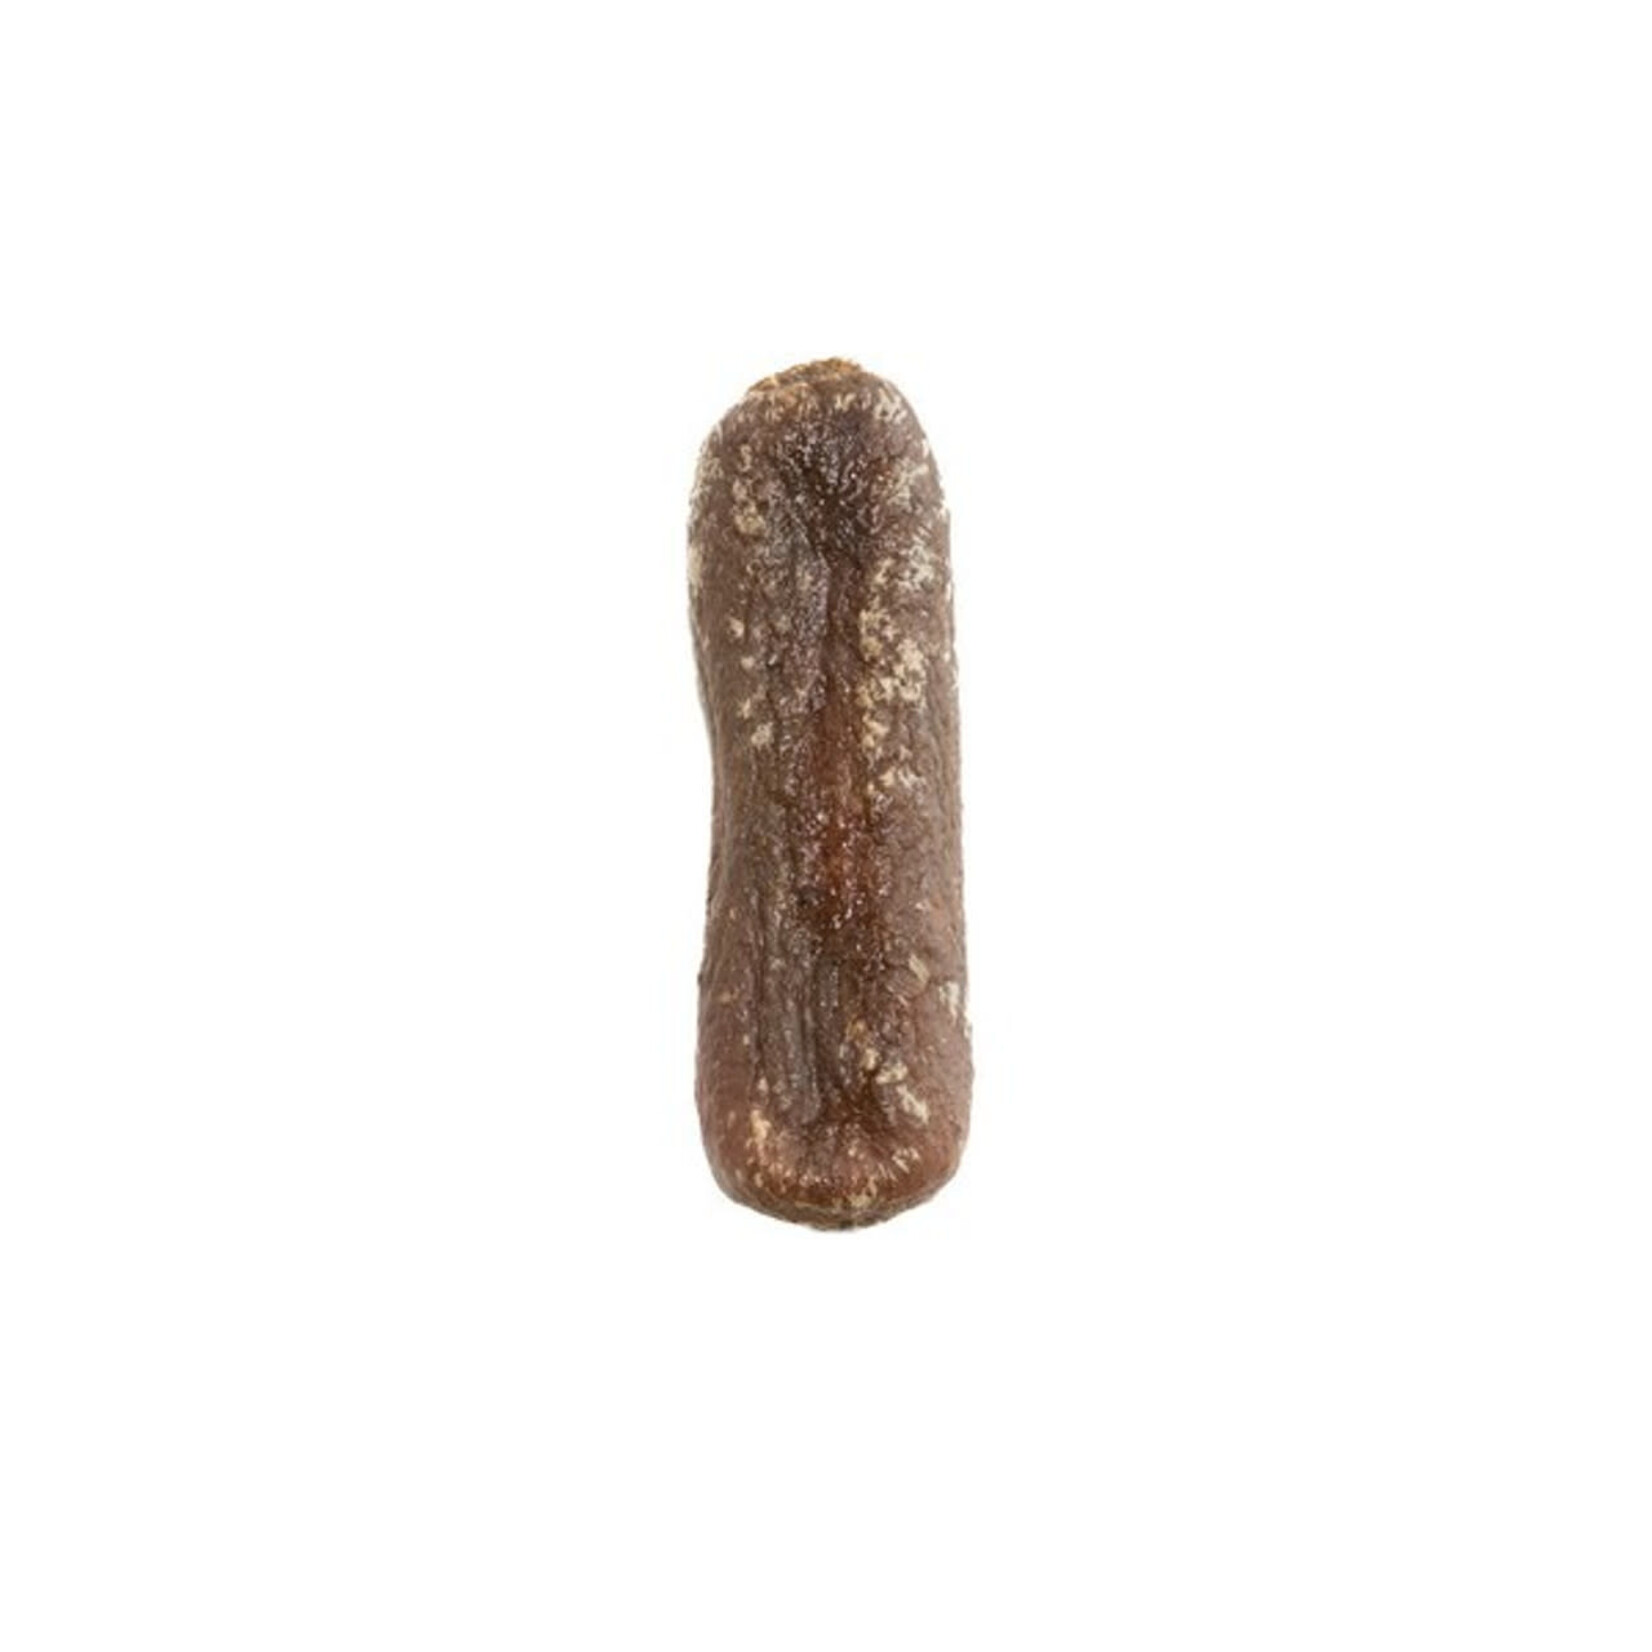 Doodle's Deli Air Dried Meaty Beef with Liver Sausage Natural Dog Treats, 1kg